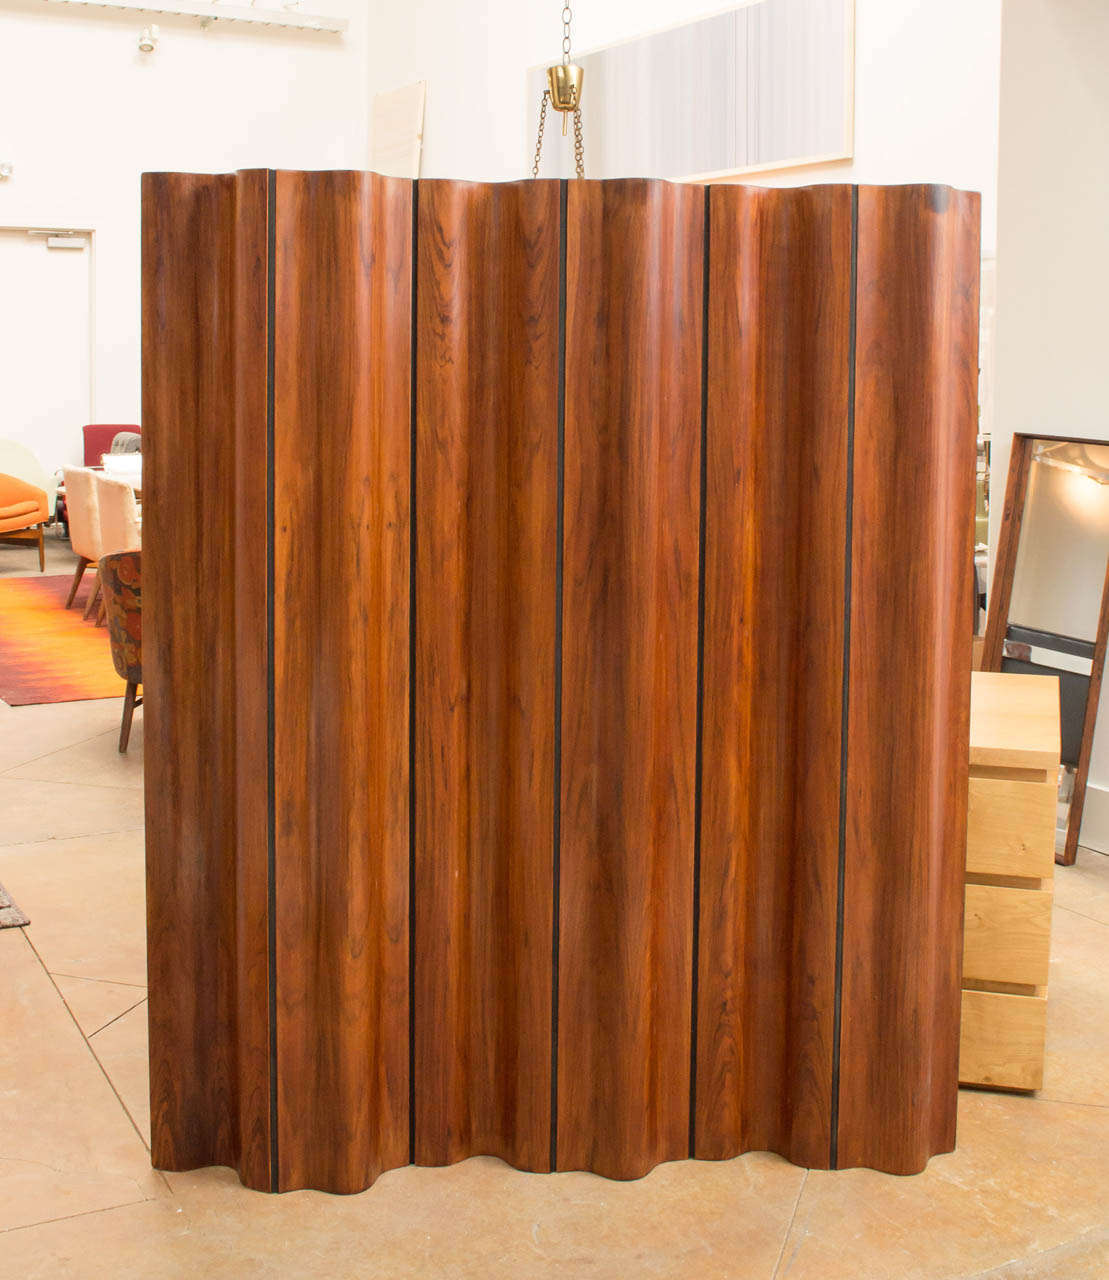 A distinctive, yet playful wave-shaped room divider/ screen. Rare, late edition rosewood. Design from 1946. 68-inch-high, portable and foldable. Marked accordingly on brass in upper corner. Number 59 of 500